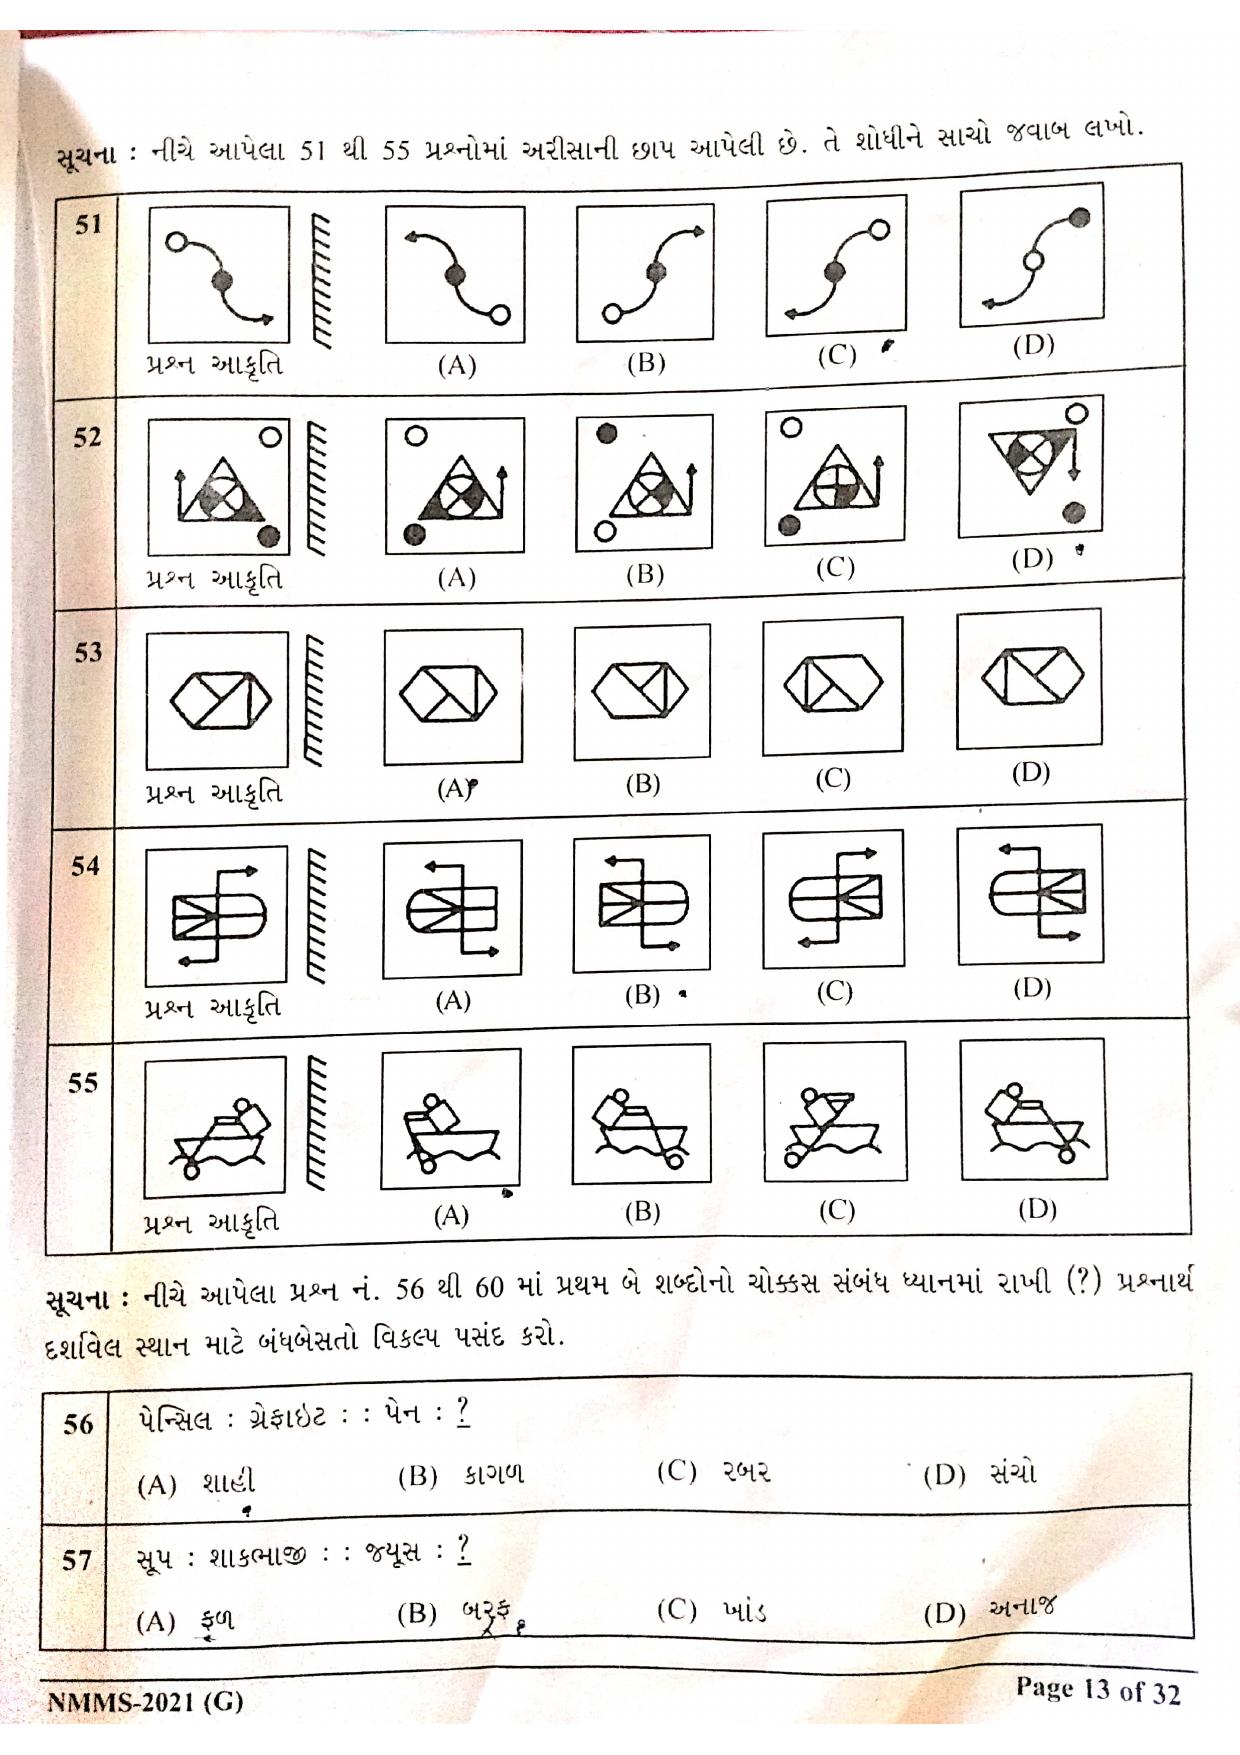 Gujarat NMMS 2021 Question Paper - Page 6